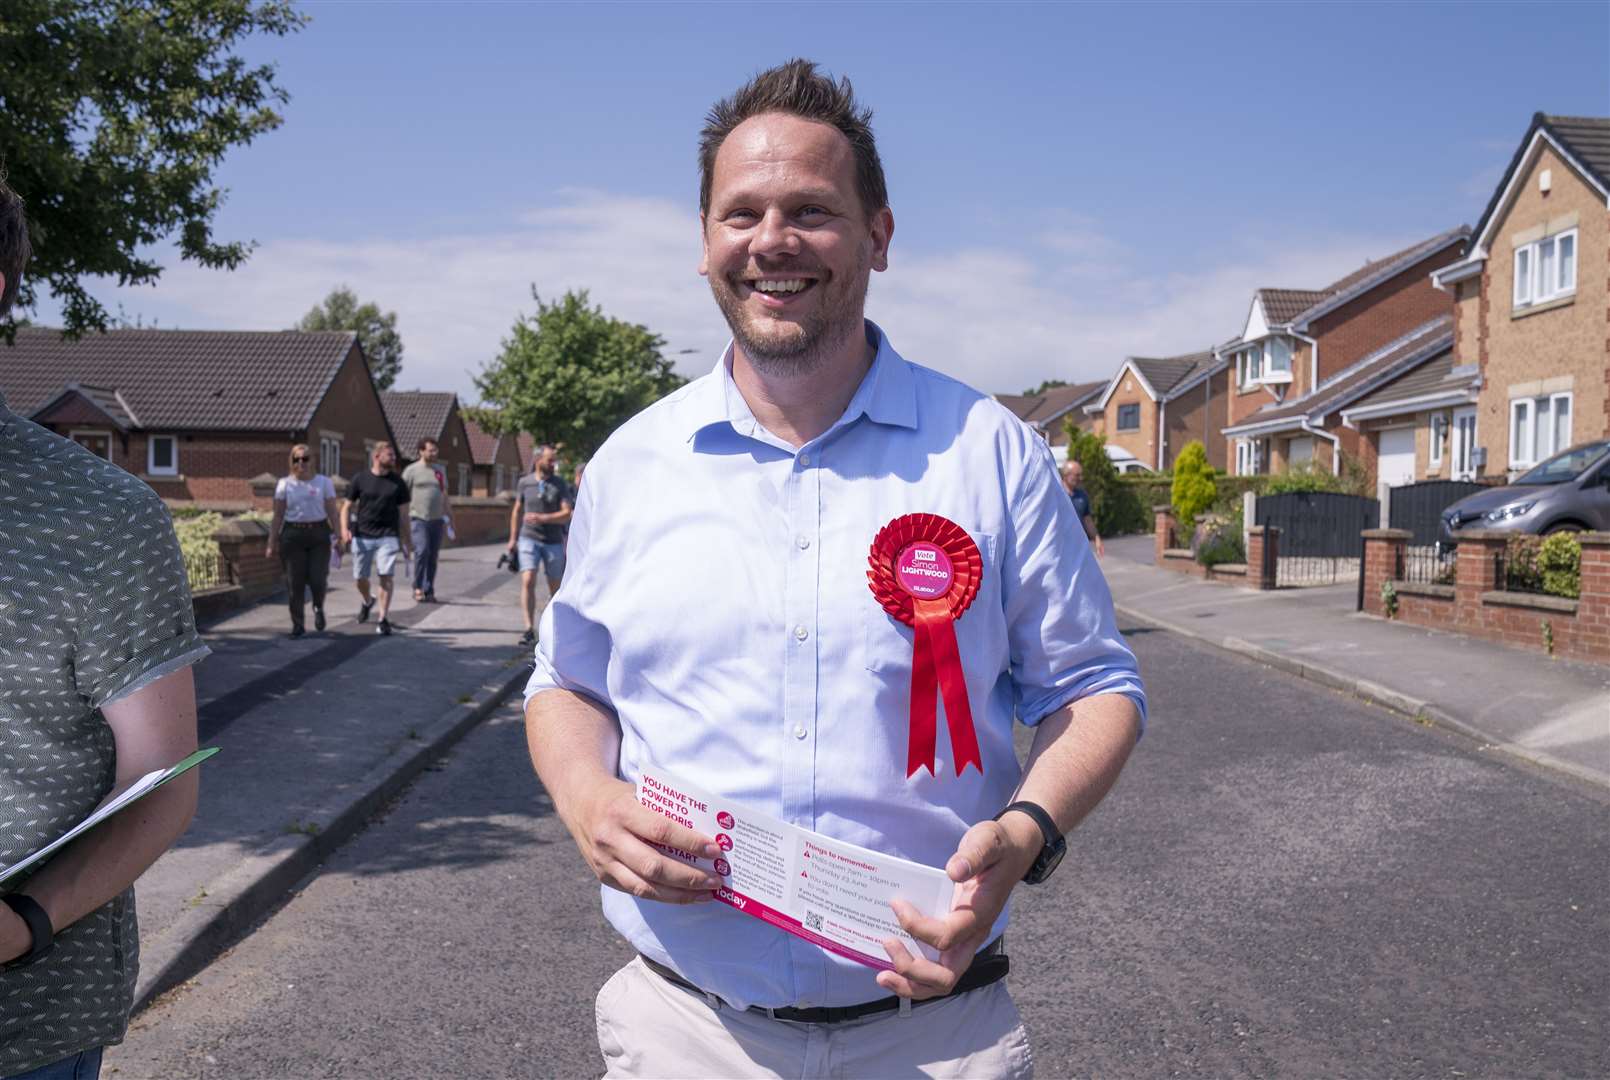 Simon Lightwood has become Wakefield’s new MP (Danny Lawson/PA)